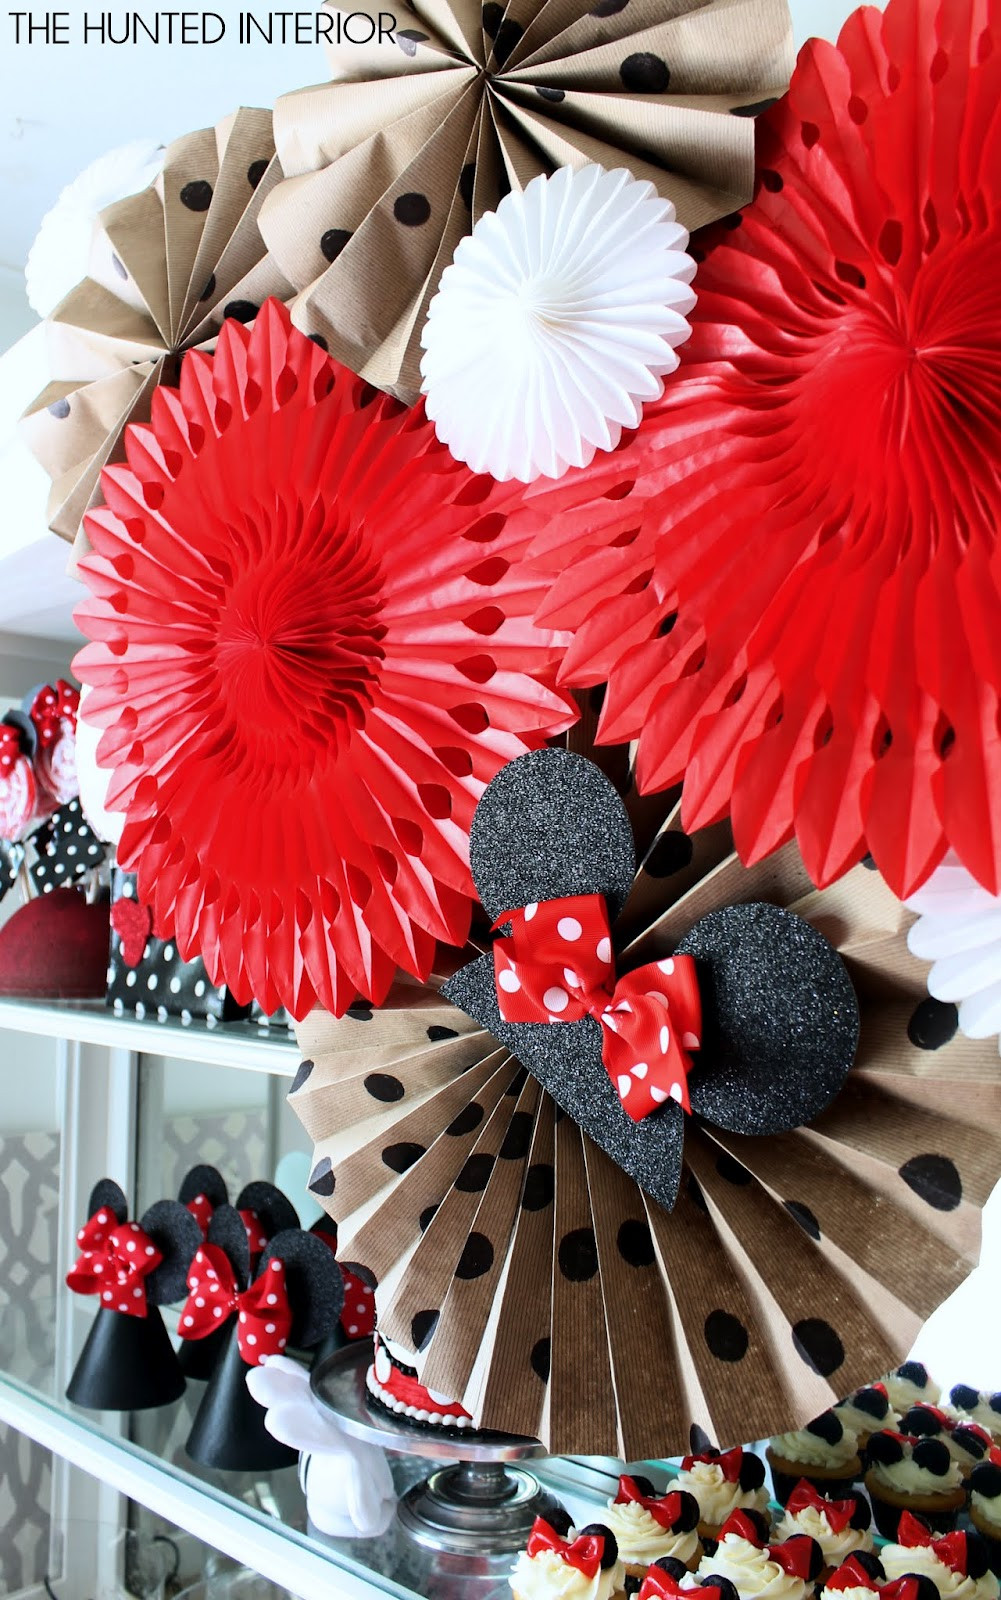 Minnie Mouse Birthday Decorations
 hunted interior Minnie Mouse Birthday Party